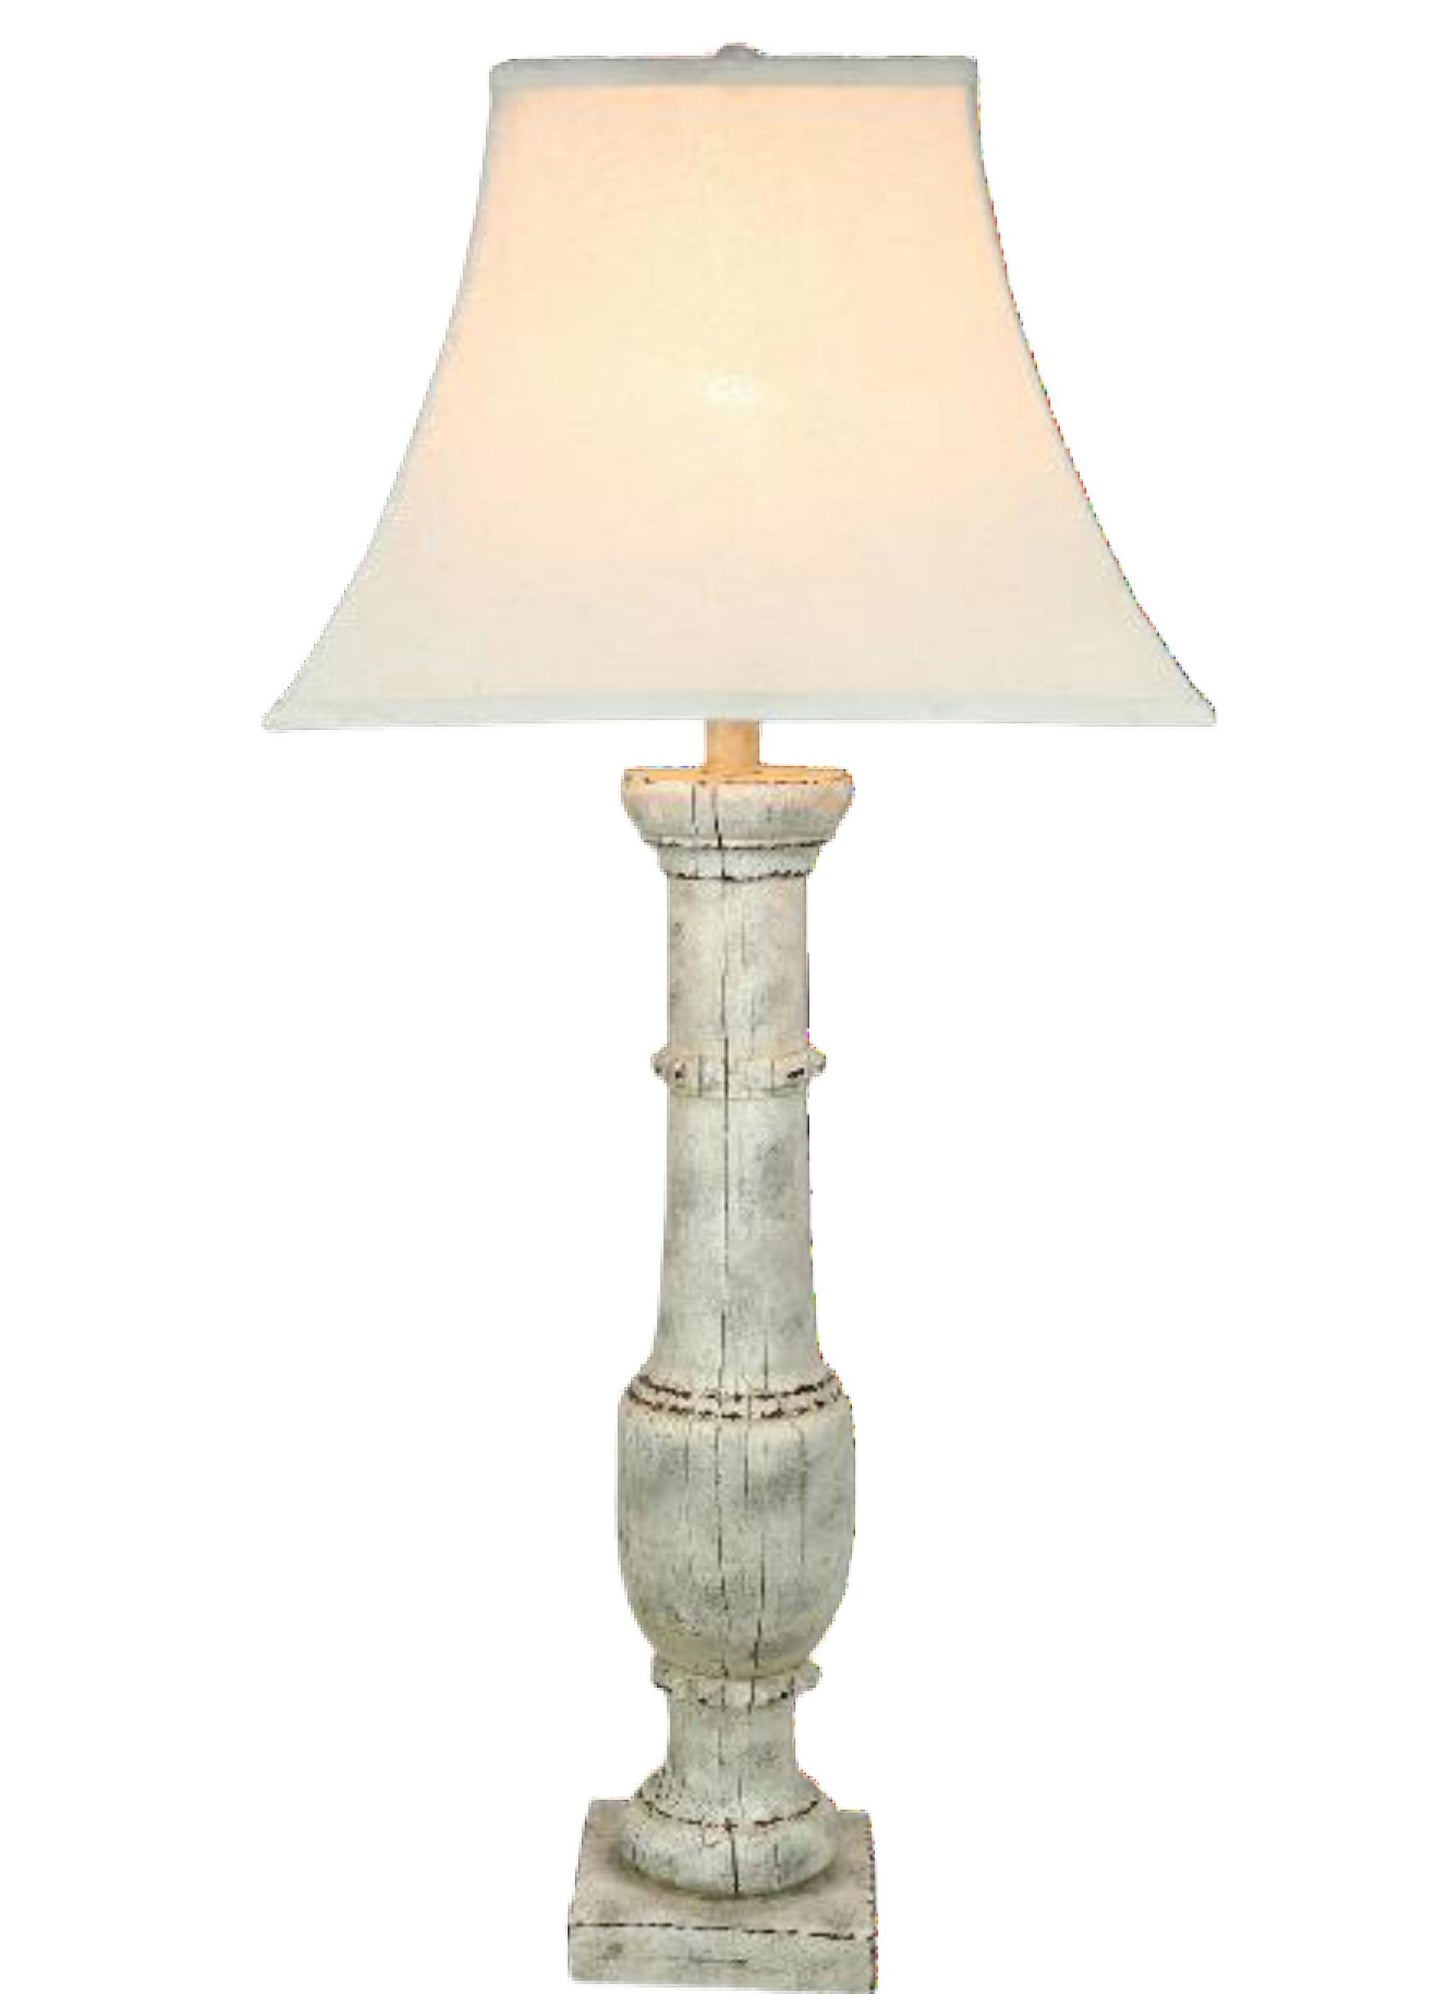 Vintage Direct 34.5"H Cream Rustic Wood Table Lamp